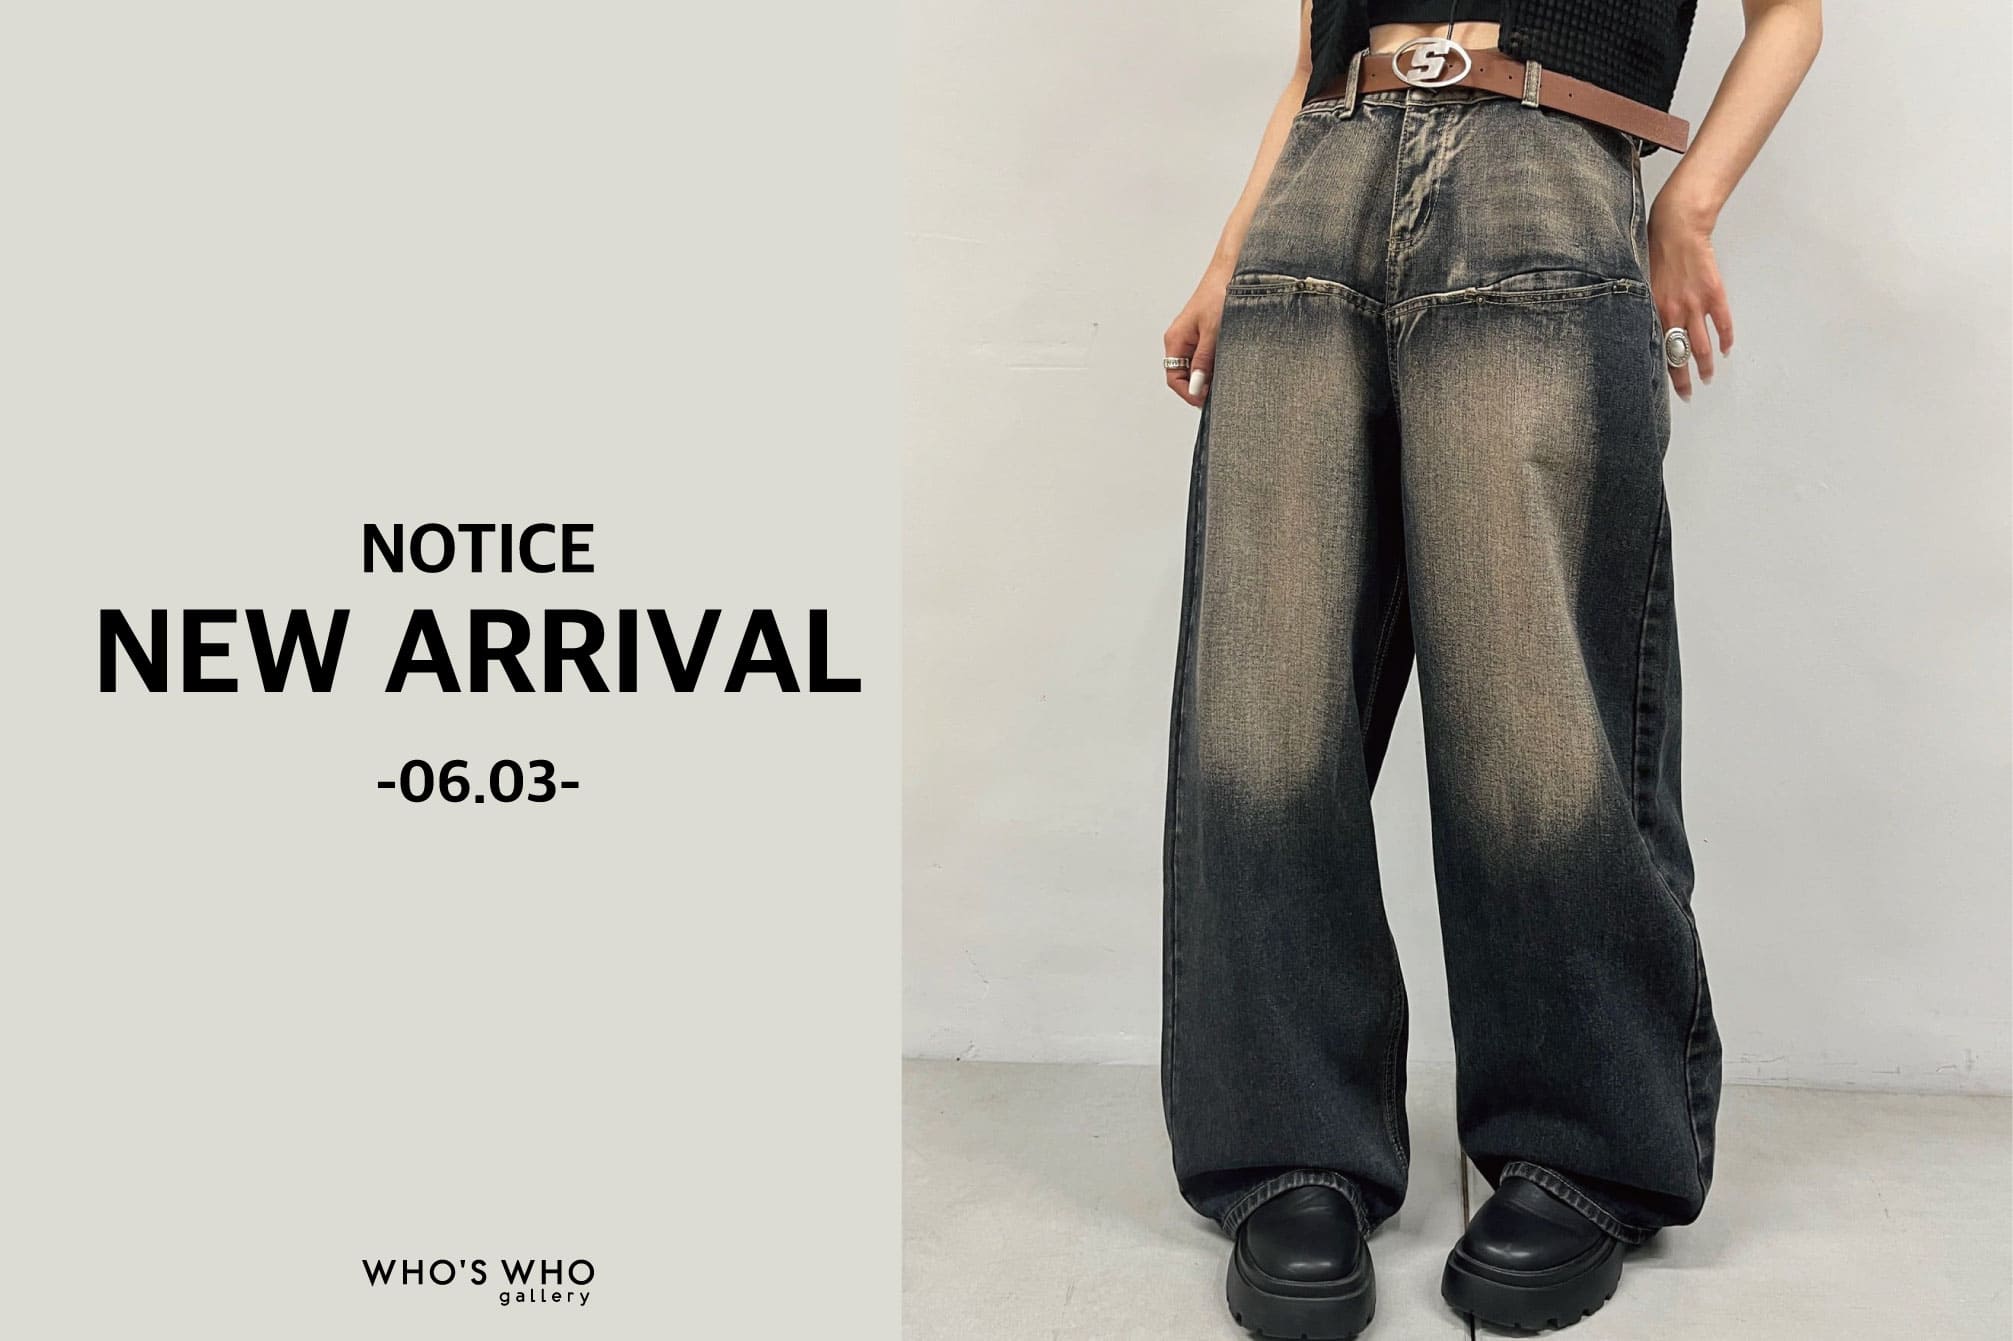 WHO’S WHO gallery 【NEW ARRIVAL NOTICE -6.03-】